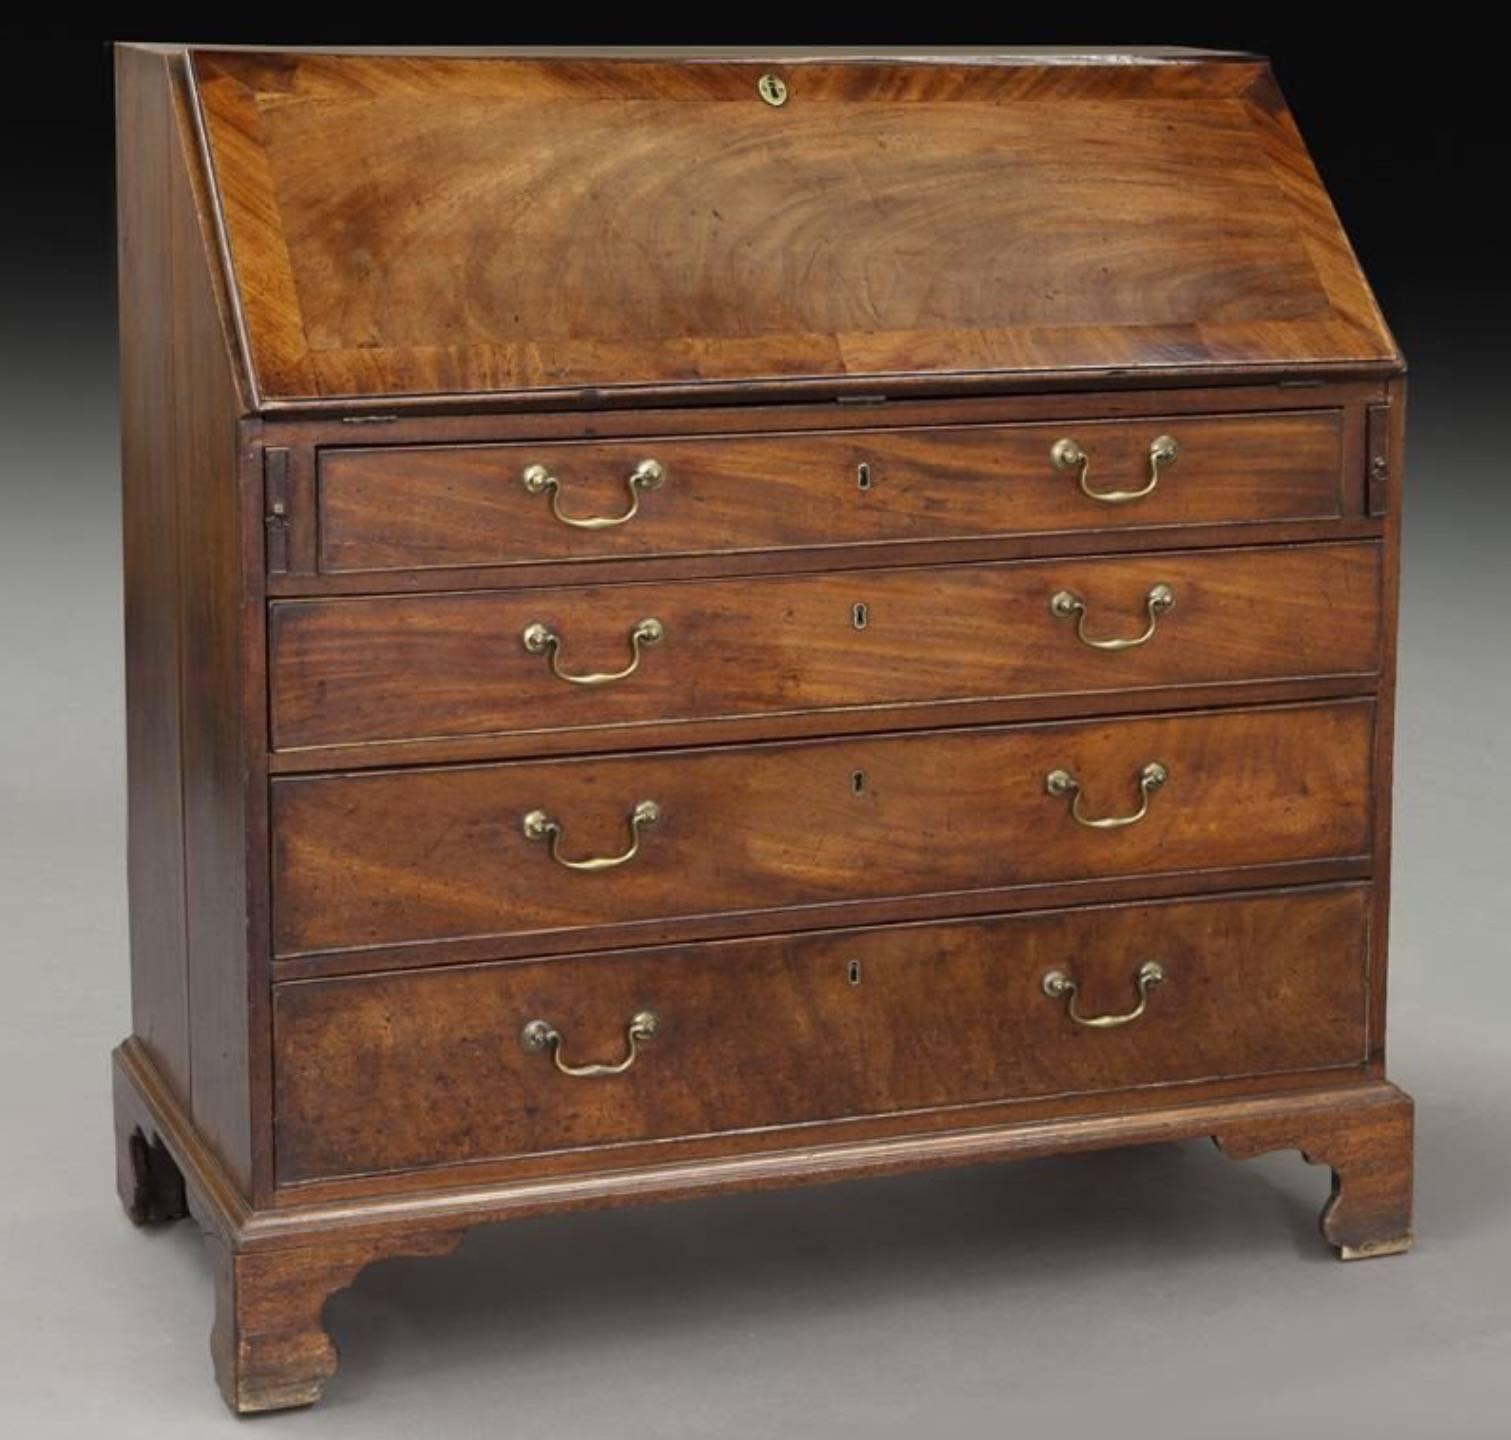 Georgian mahogany drop front secretary bureau desk, the crossbanded lid revealing a nicely fitted interior over four graduated full width drawers with original brass pulls and iron locks, standing on shaped bracket feet. 

Measures: 43.5